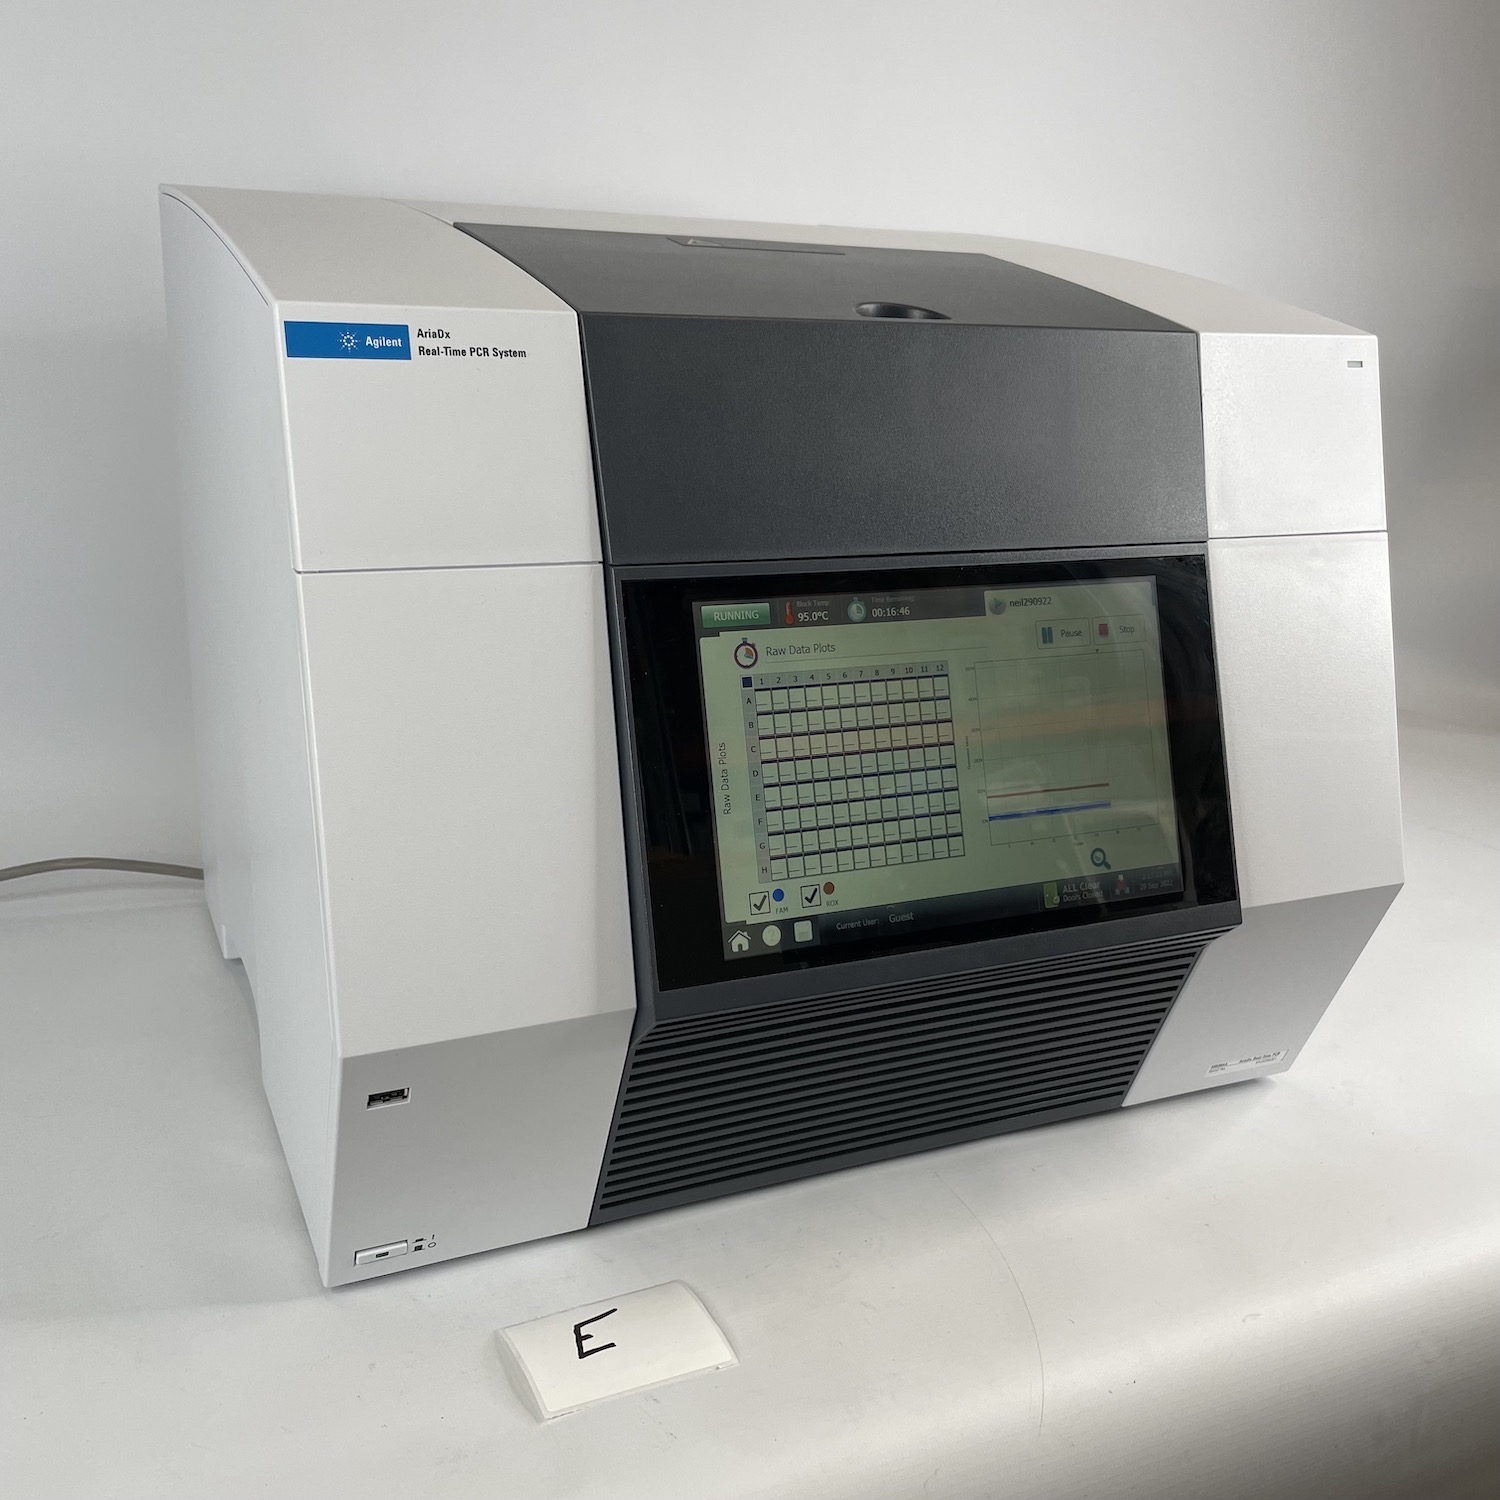 agilent | ariadx | real-time pcr | k8930-64001 | rox | hex | fam | cy5